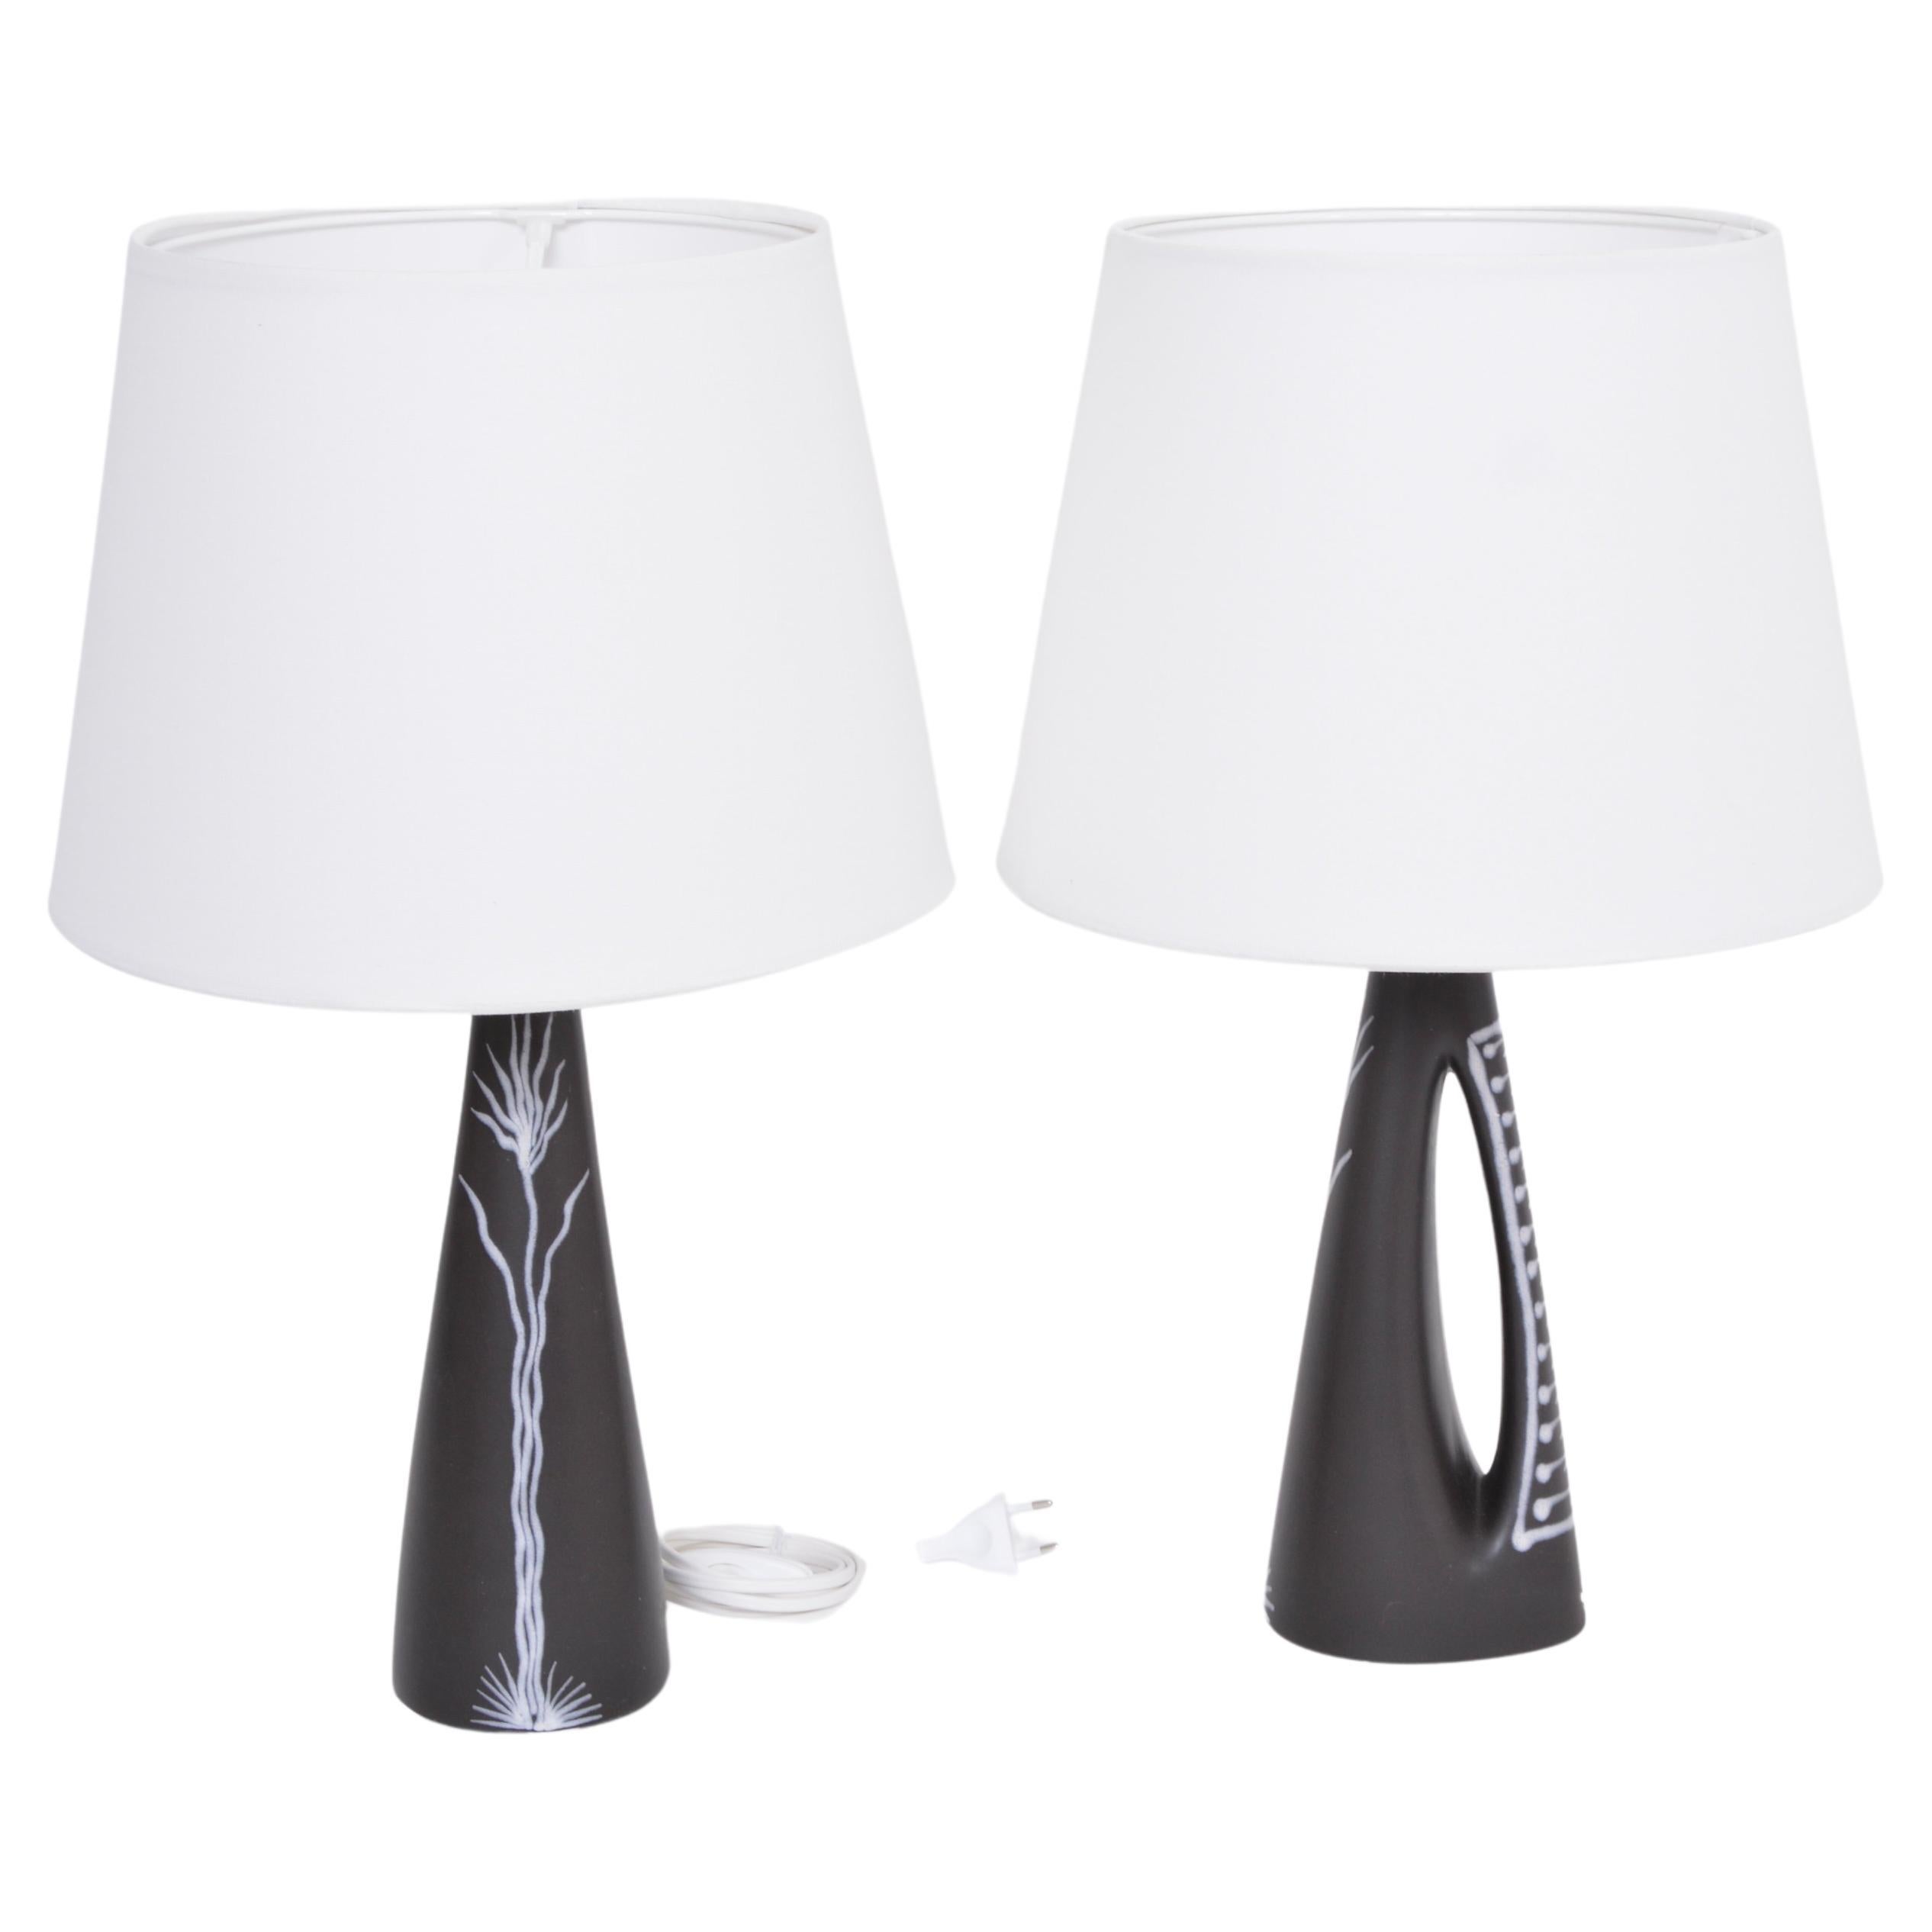 Pair of Black Danish Midcentury Ceramic Table Lamps by Holm Sorensen for Søholm For Sale